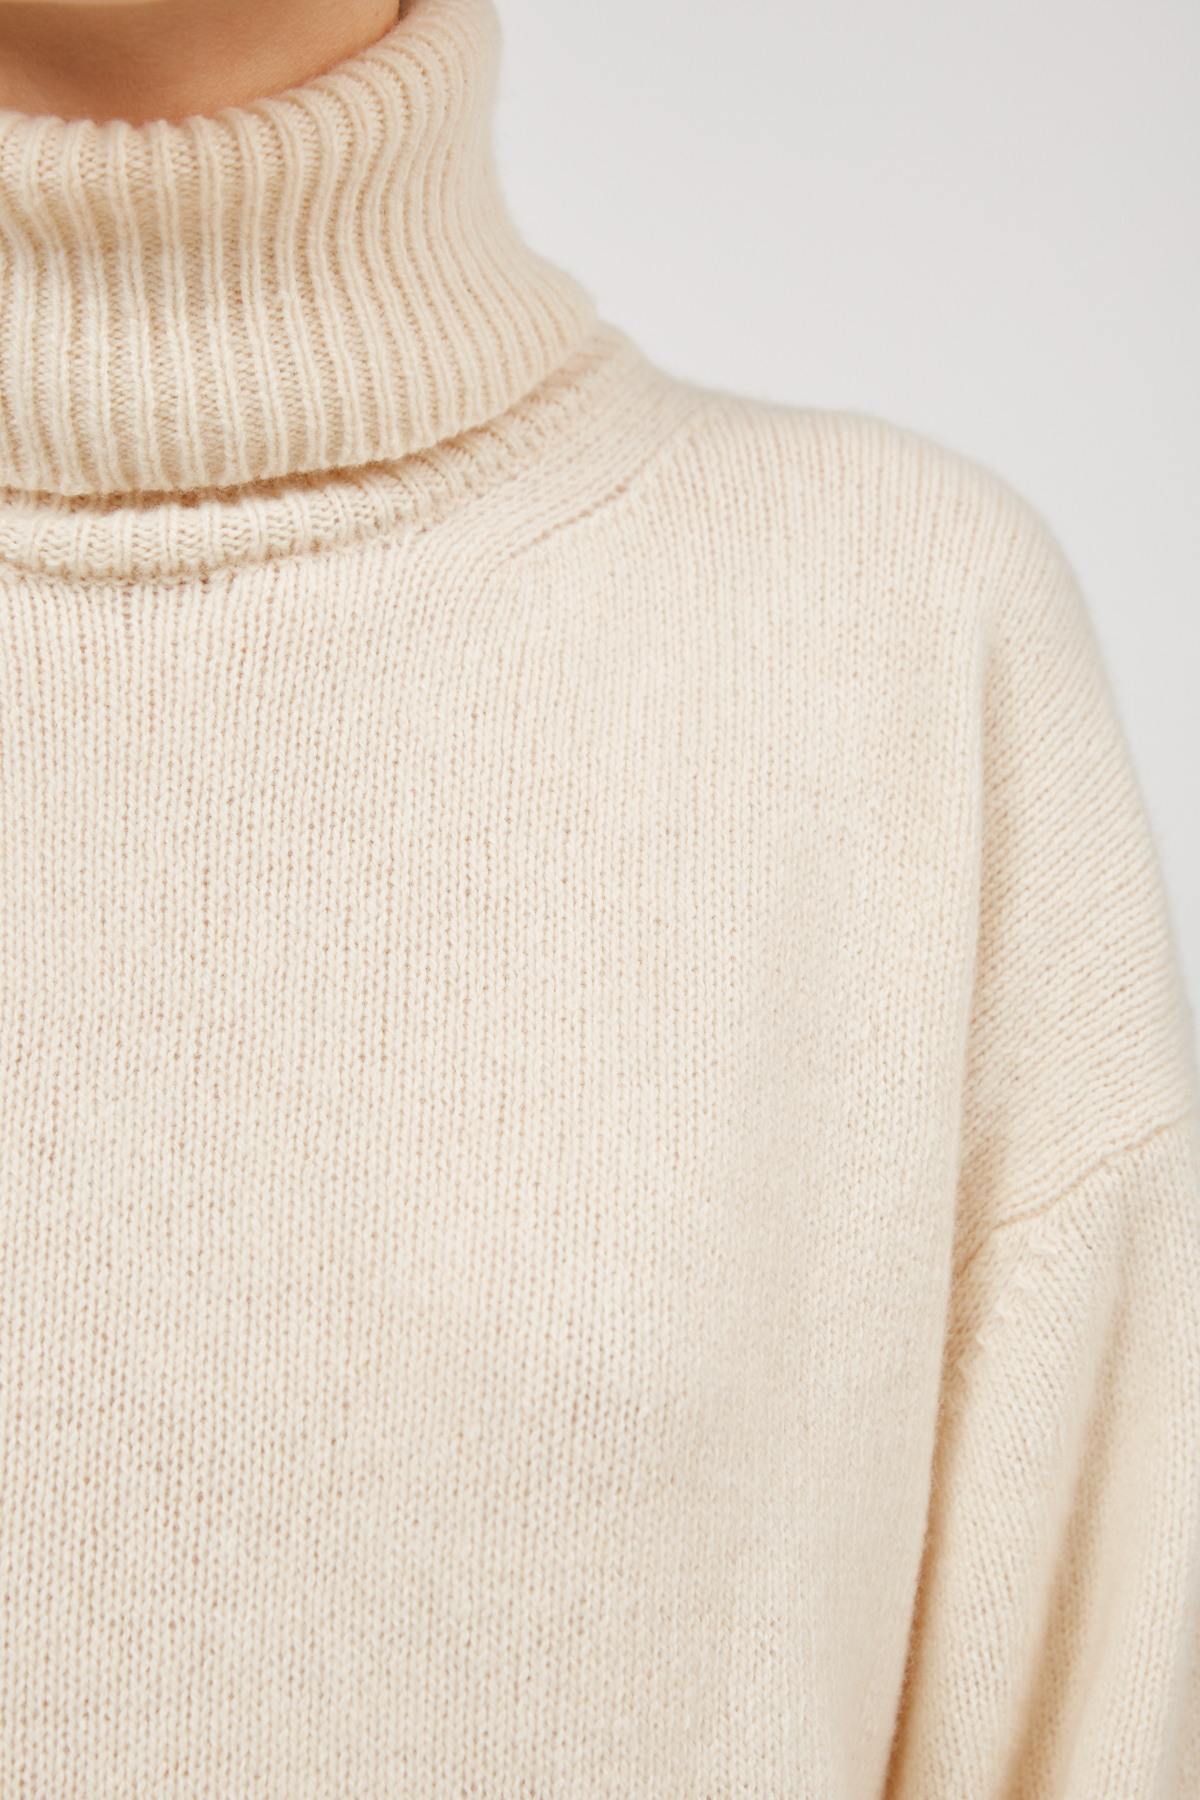 Cashmere milk knitted oversized sweater, photo 6